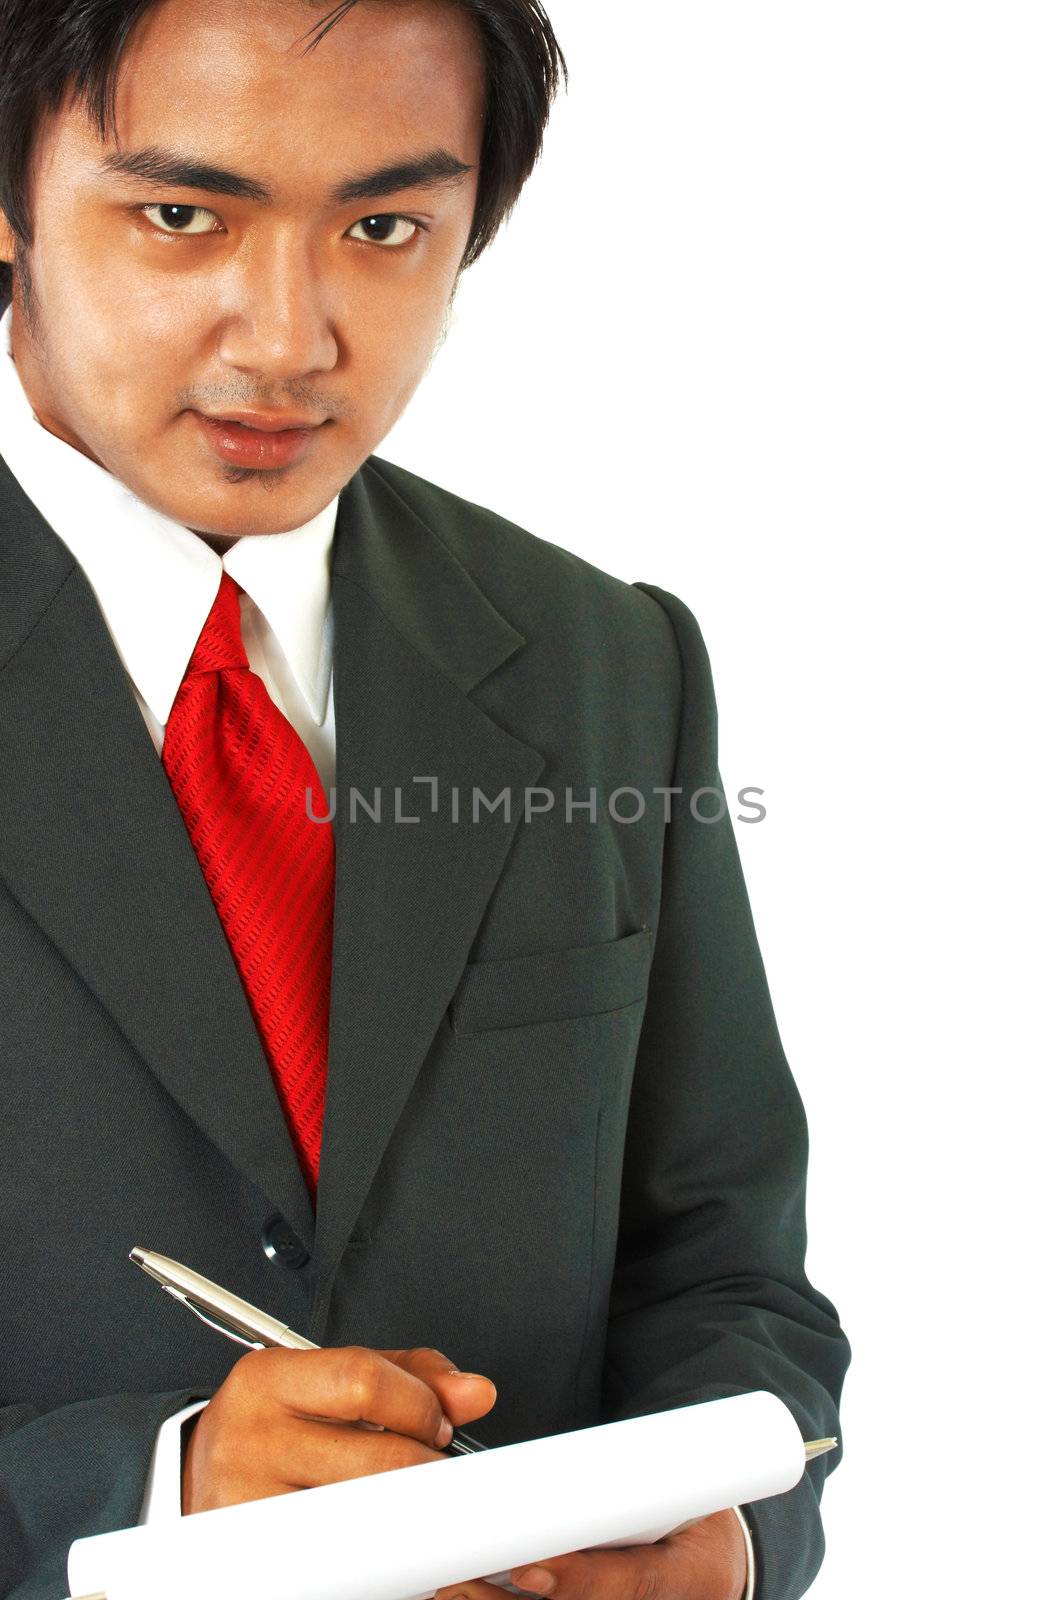 Businessman In Suit And Tie Writing A Note Or Memo